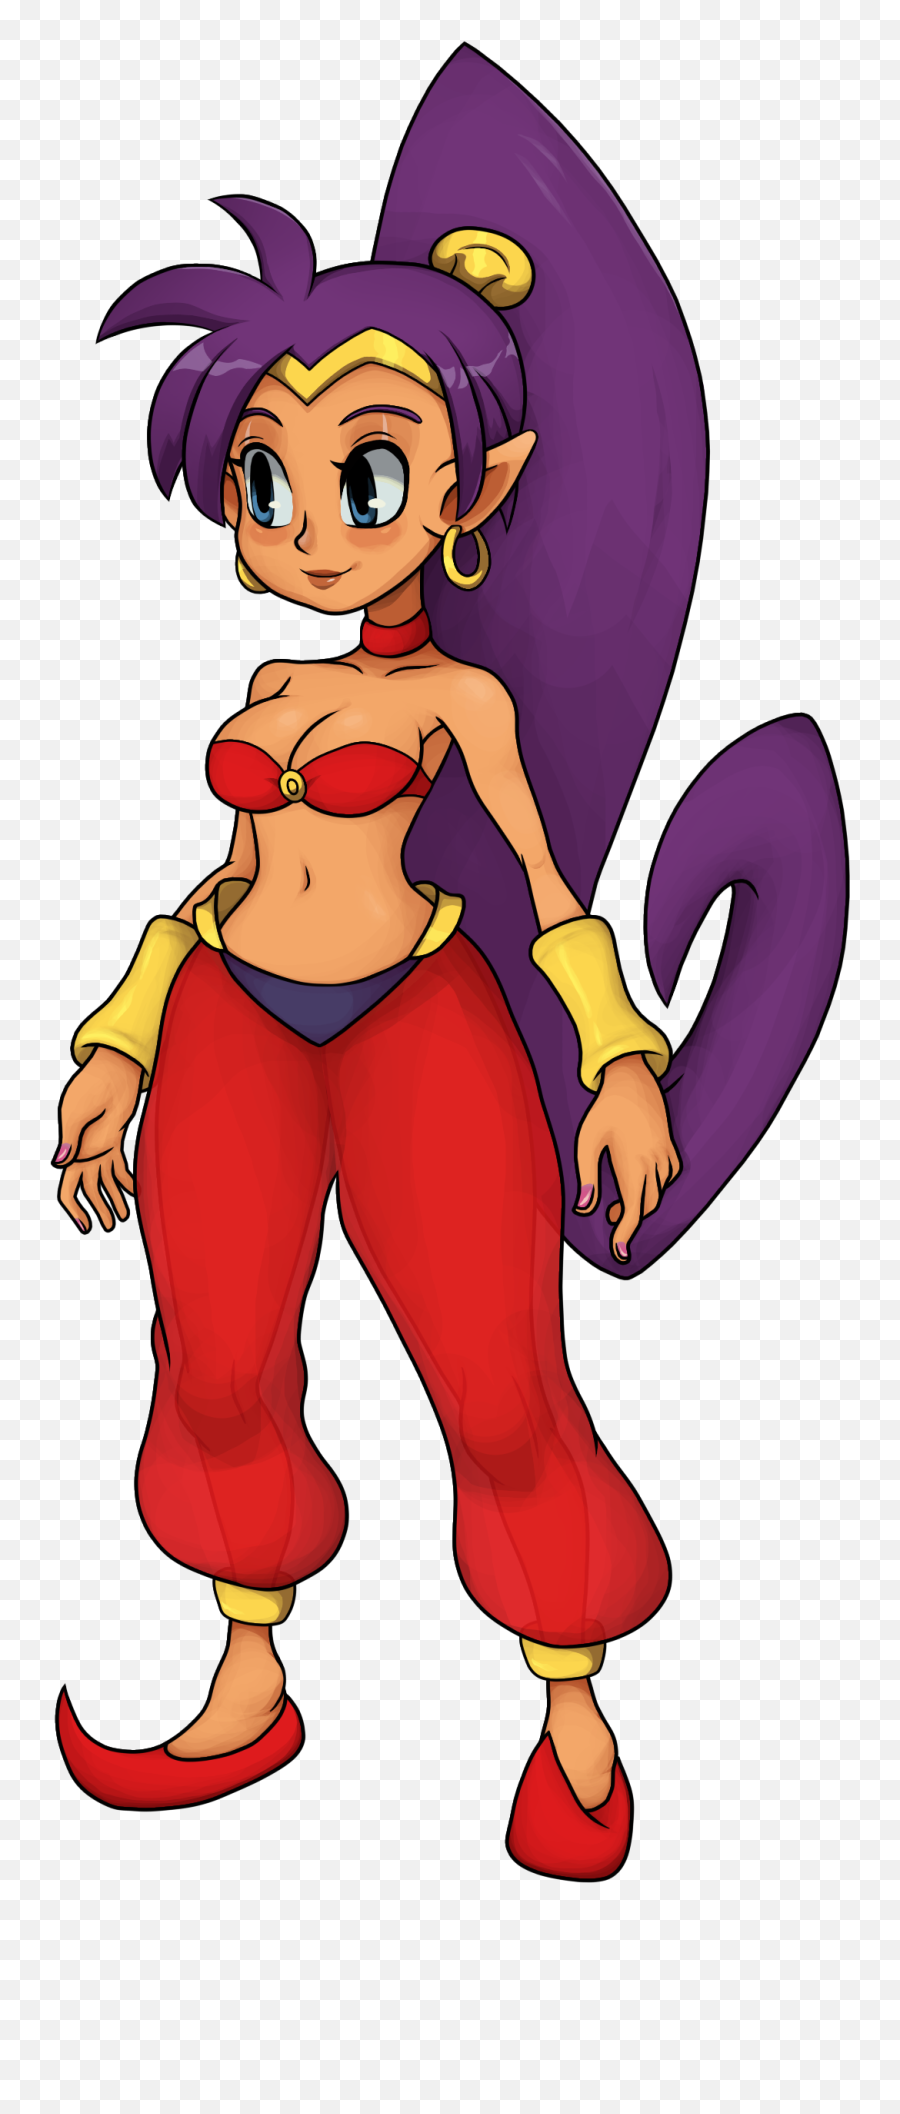 I Made Shantae In The Skullgirls Style Png Valentine Icon